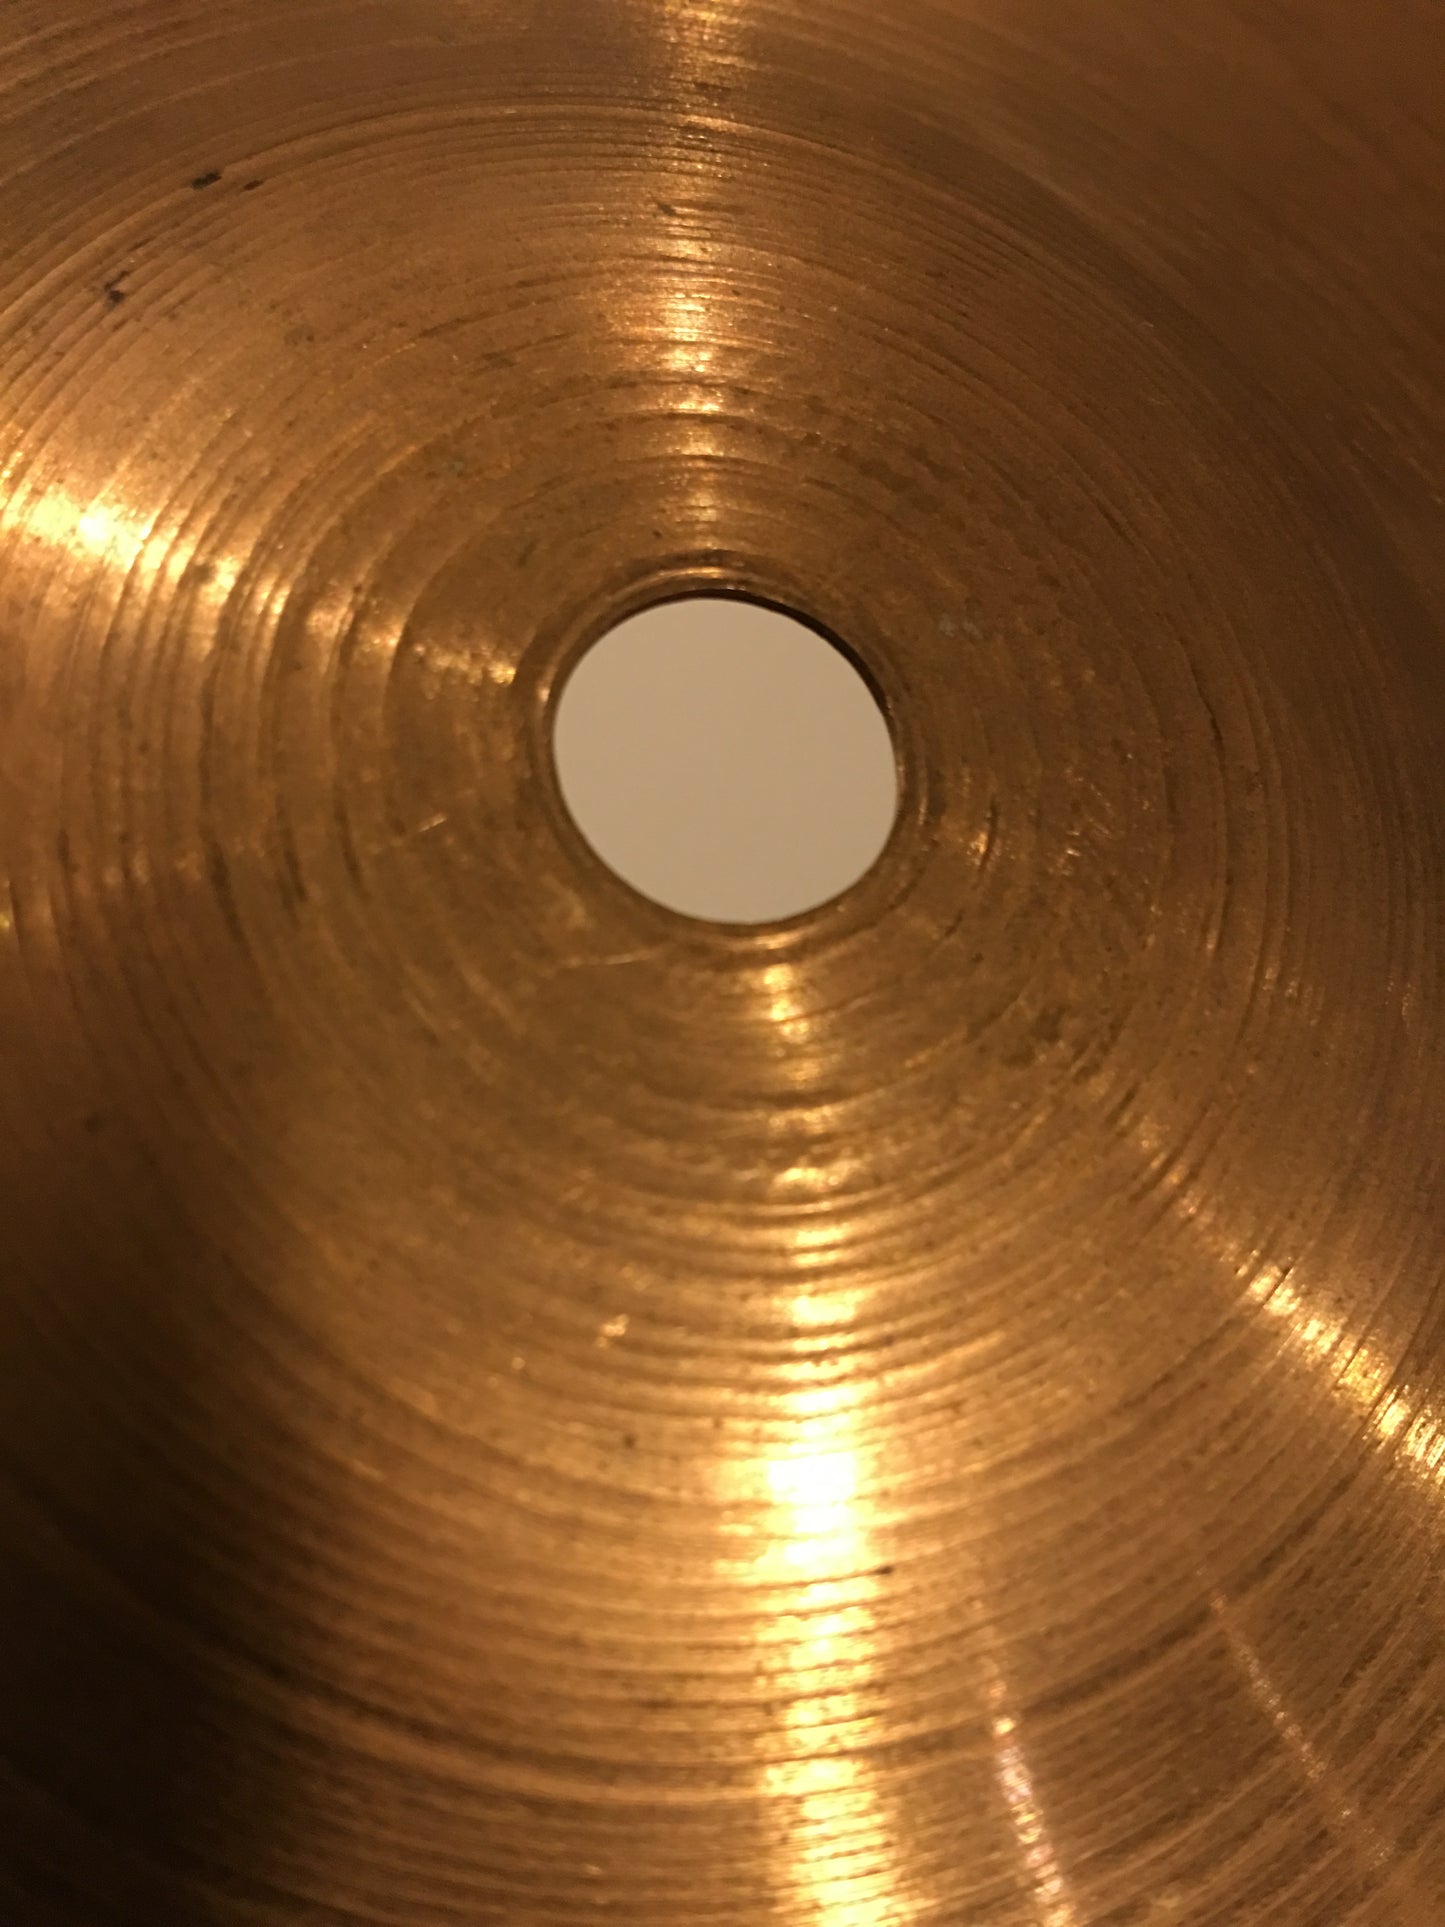 18" Pasite 2002 Crash Cymbal 1983 Red Label 1505g #484